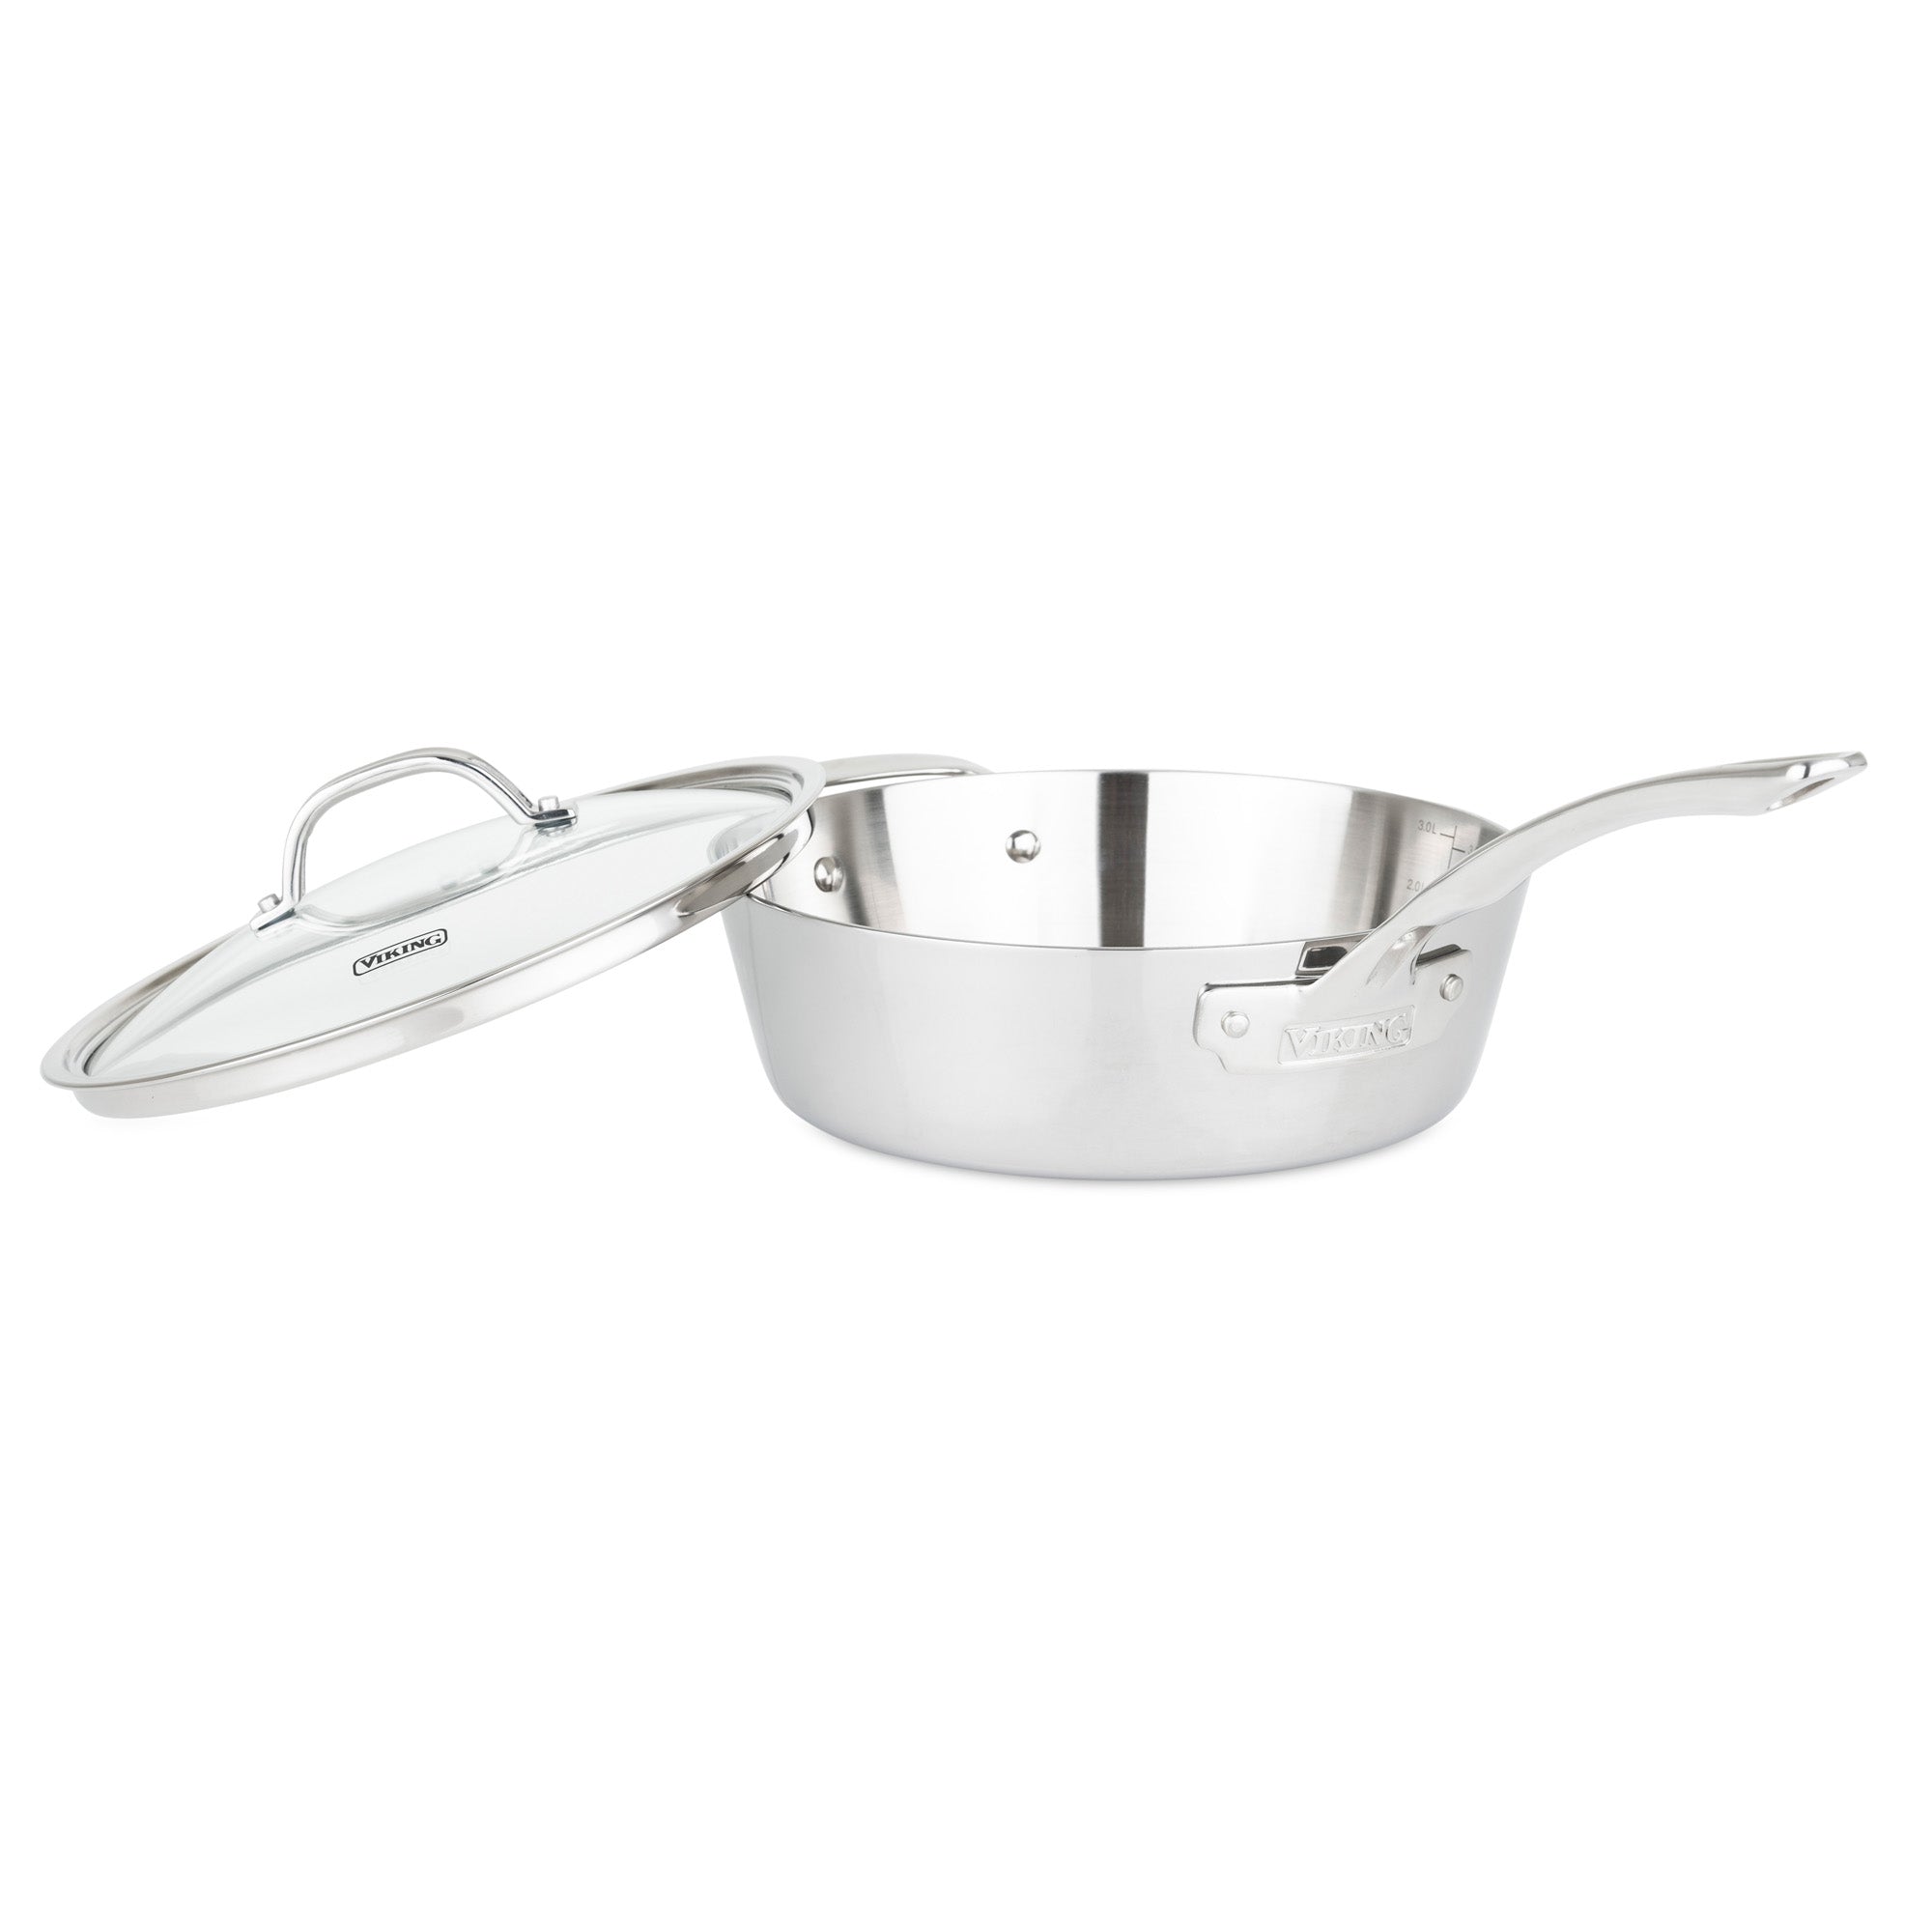 Vigor SS3 Series 3 Qt. Tri-Ply Stainless Steel Saute Pan with Cover